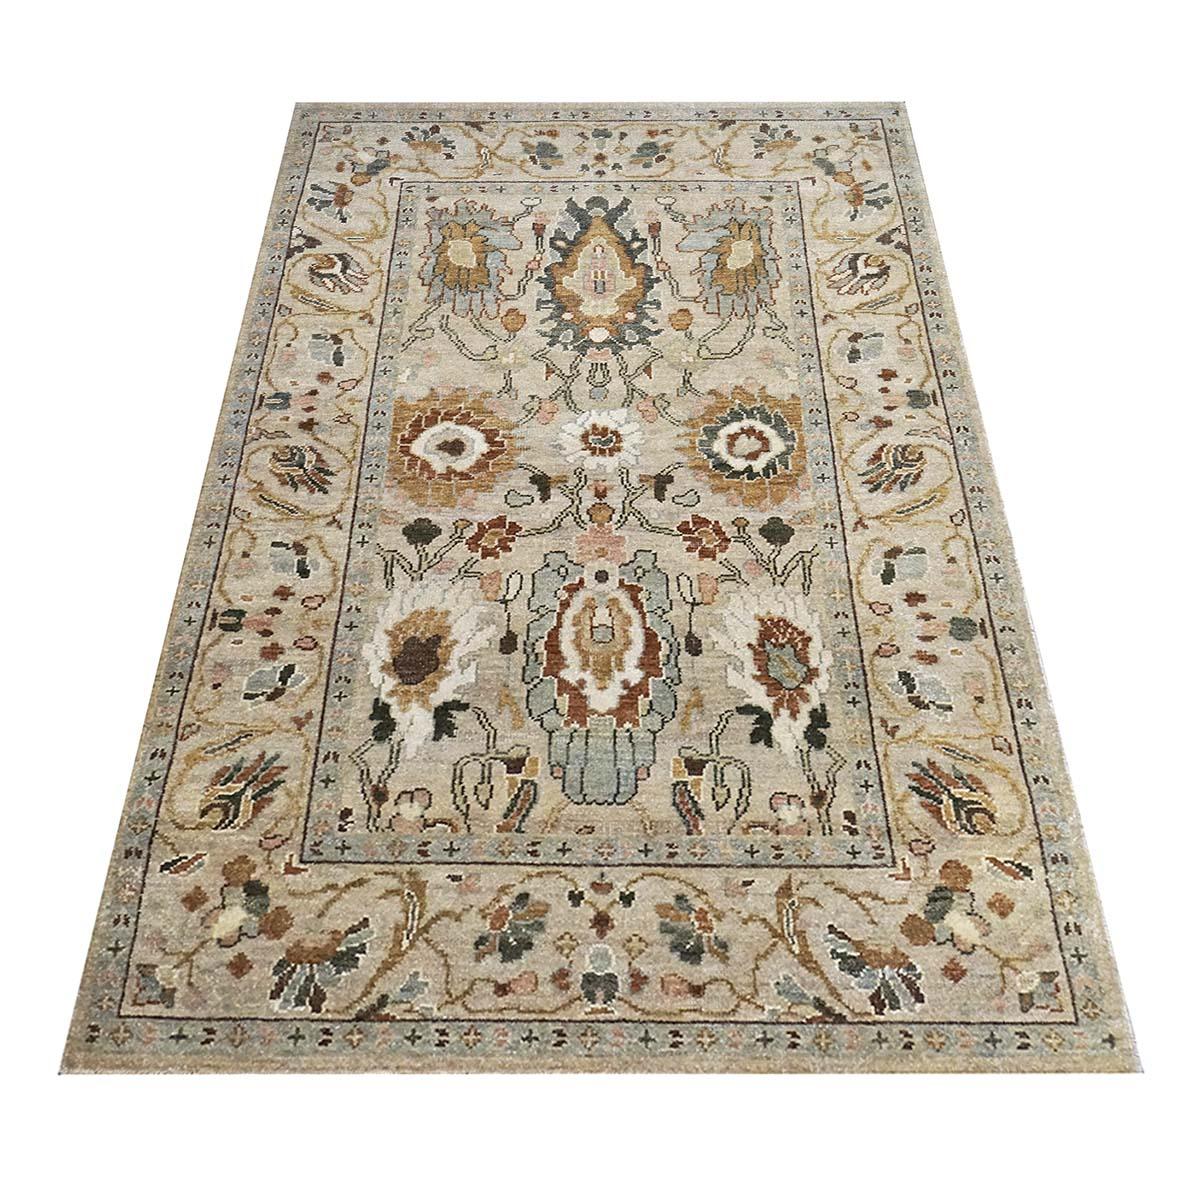 Ashly Fine Rugs presents an antique recreation of an original Persian Sultanabad 4x6 Handmade Area Rug. Part of our own previous production, this antique recreation was thought of and created in-house and 100% handmade in Afghanistan by master